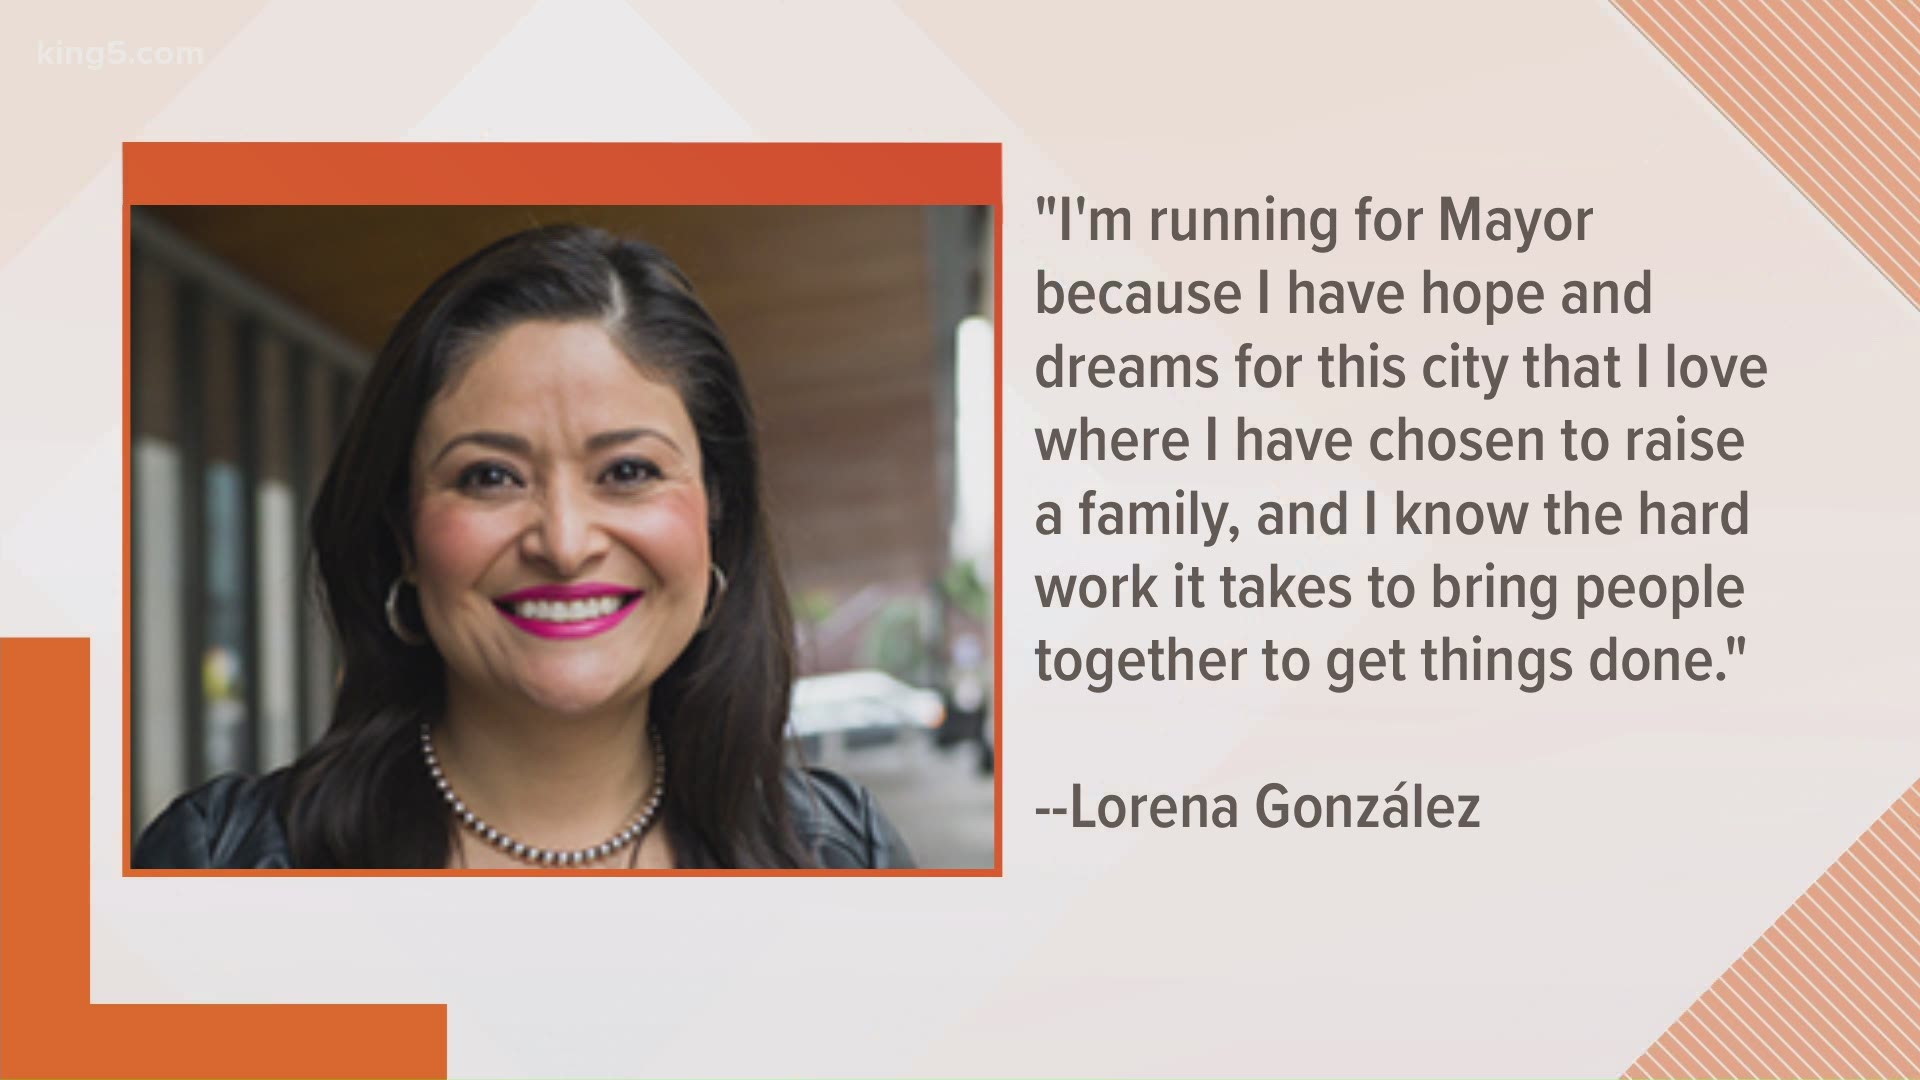 Lorena Gonzalez is a civil rights attorney and the current president of the Seattle City Council.